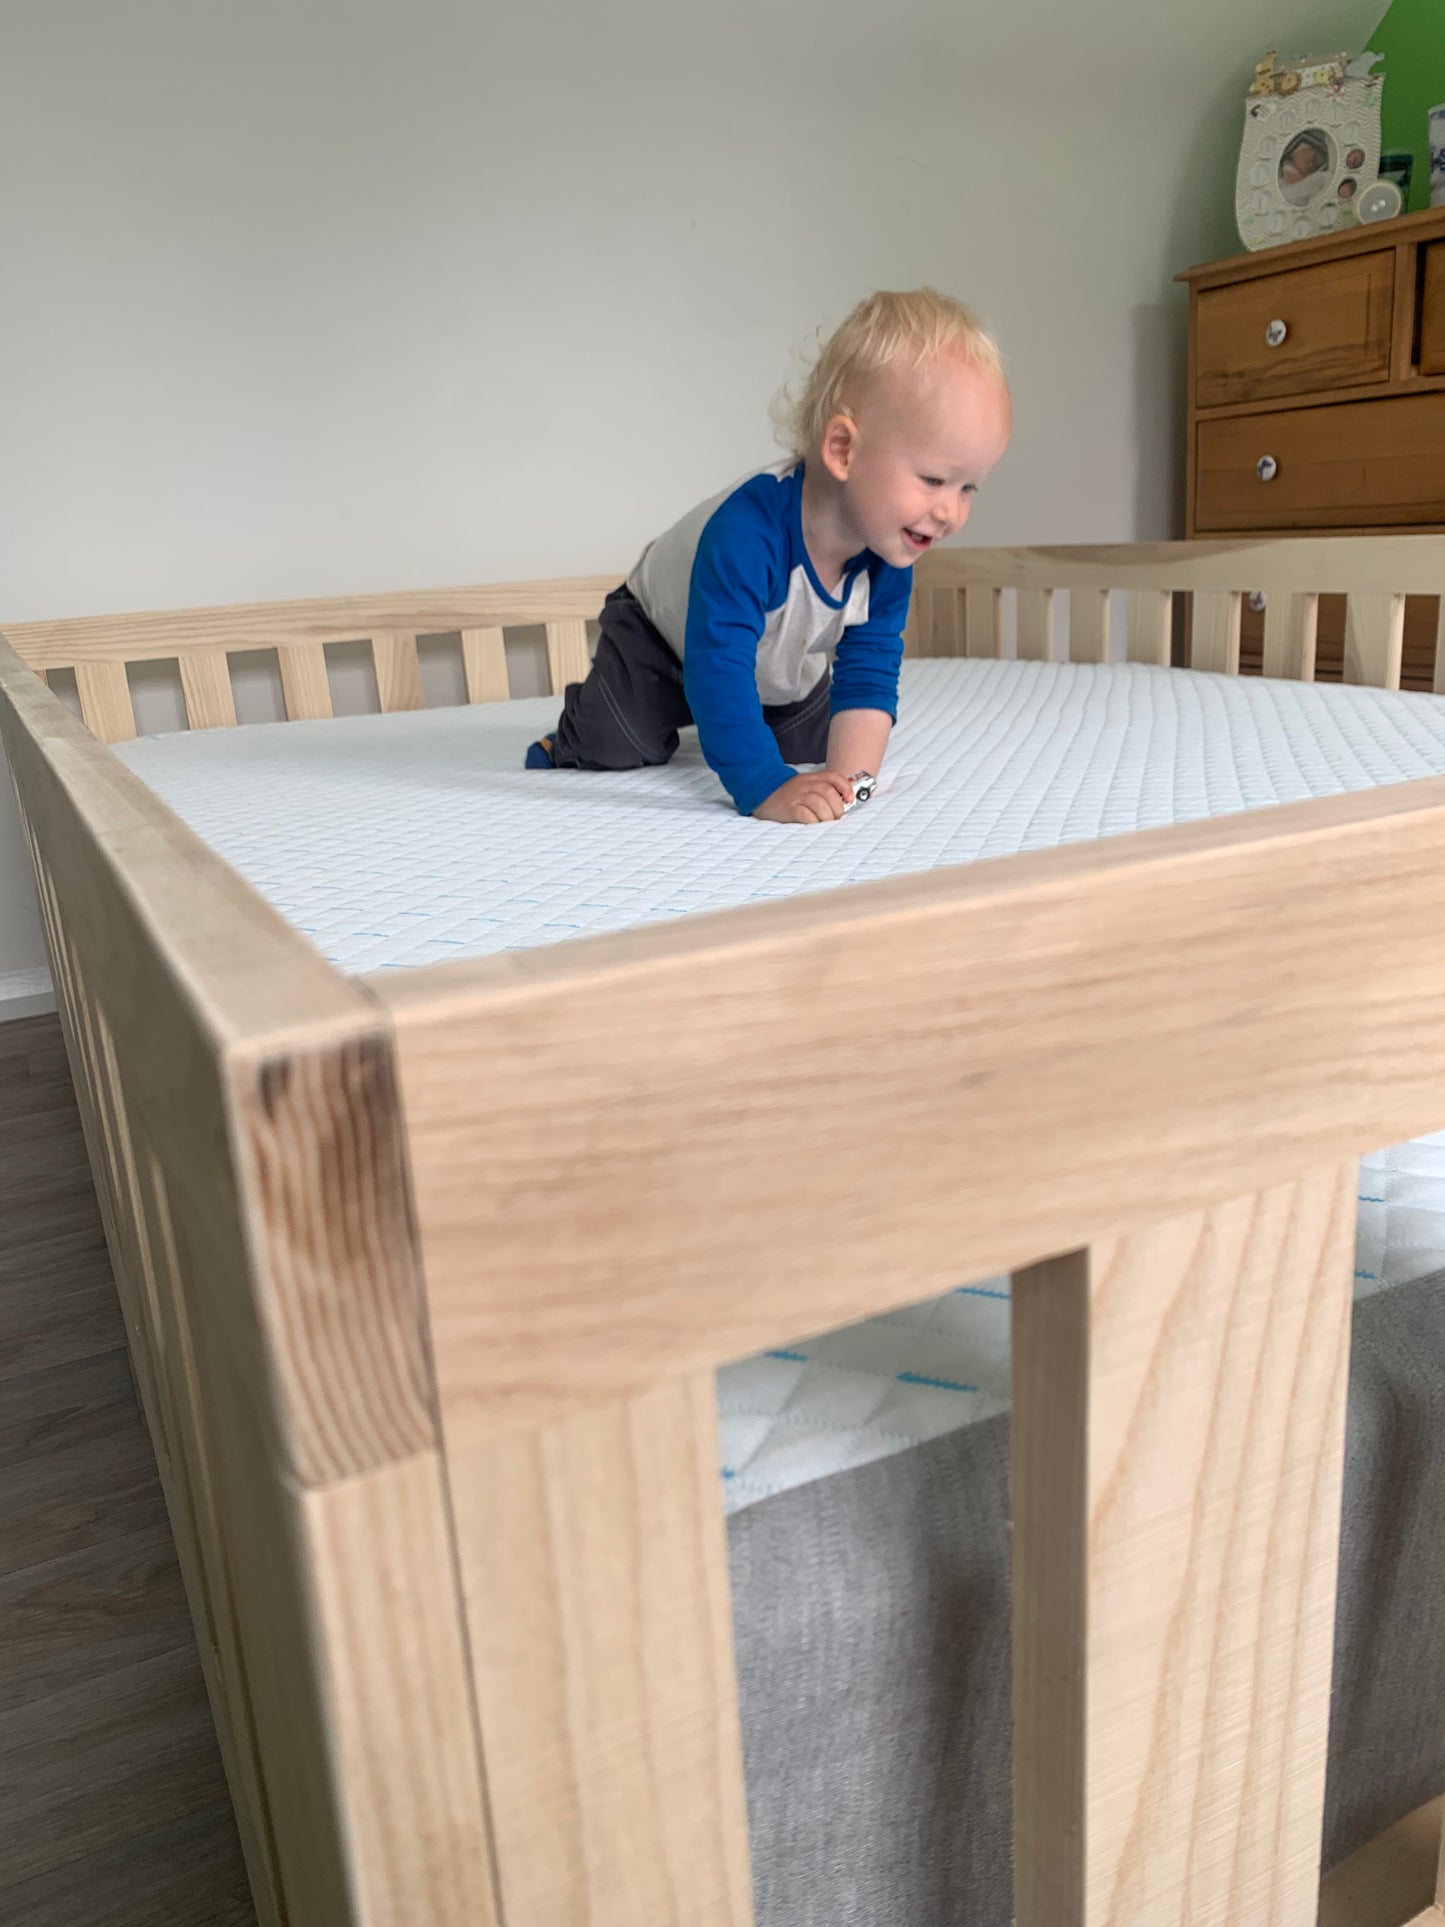 Deposit on a Montessori bed in beech or ash | toddler floor bed | kids bed frame | co-sleeping bed.  Made To Order To Your Specification